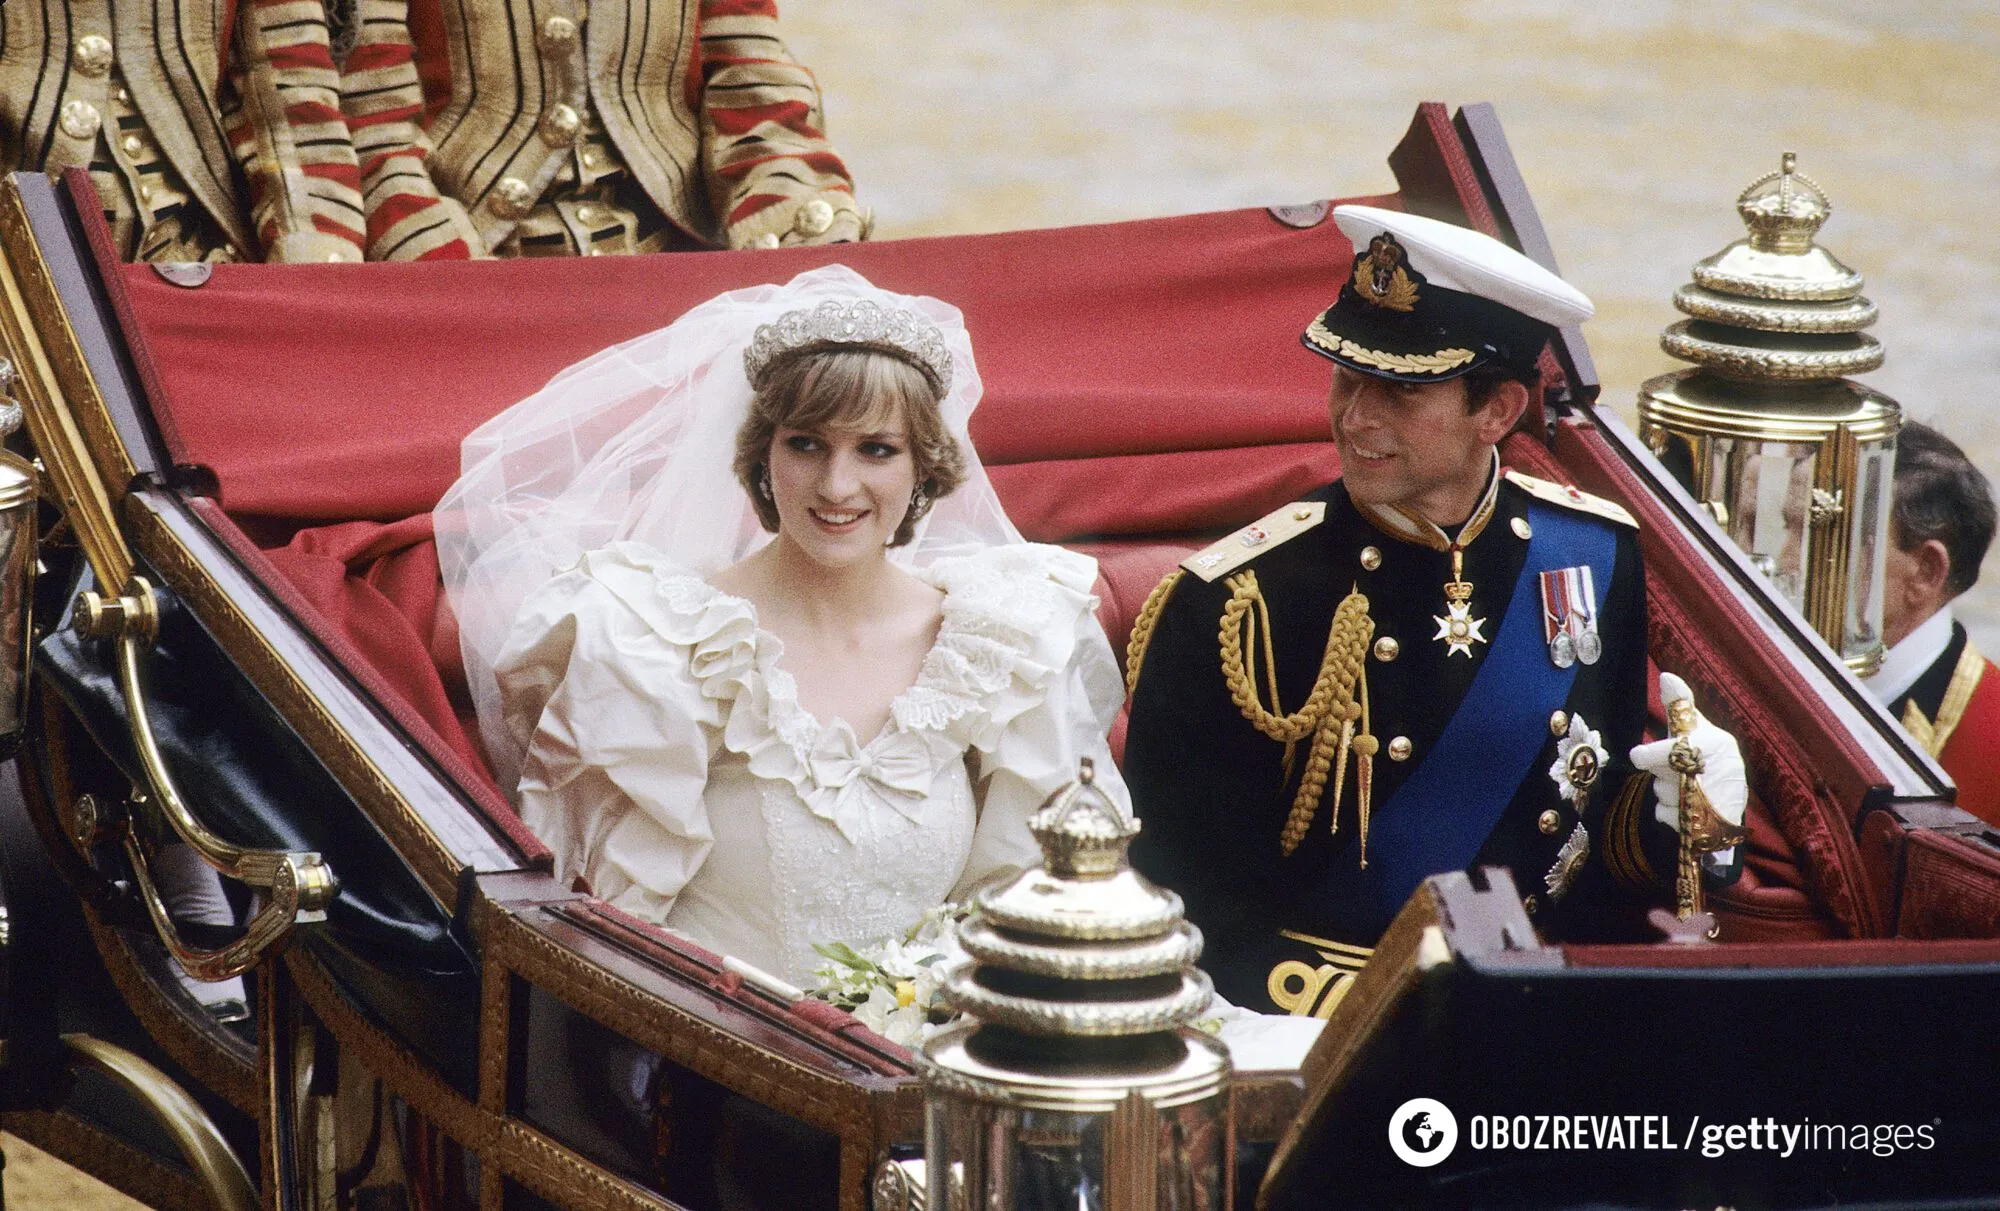 10 Princess Diana hairstyles that will never go out of style. Photo.